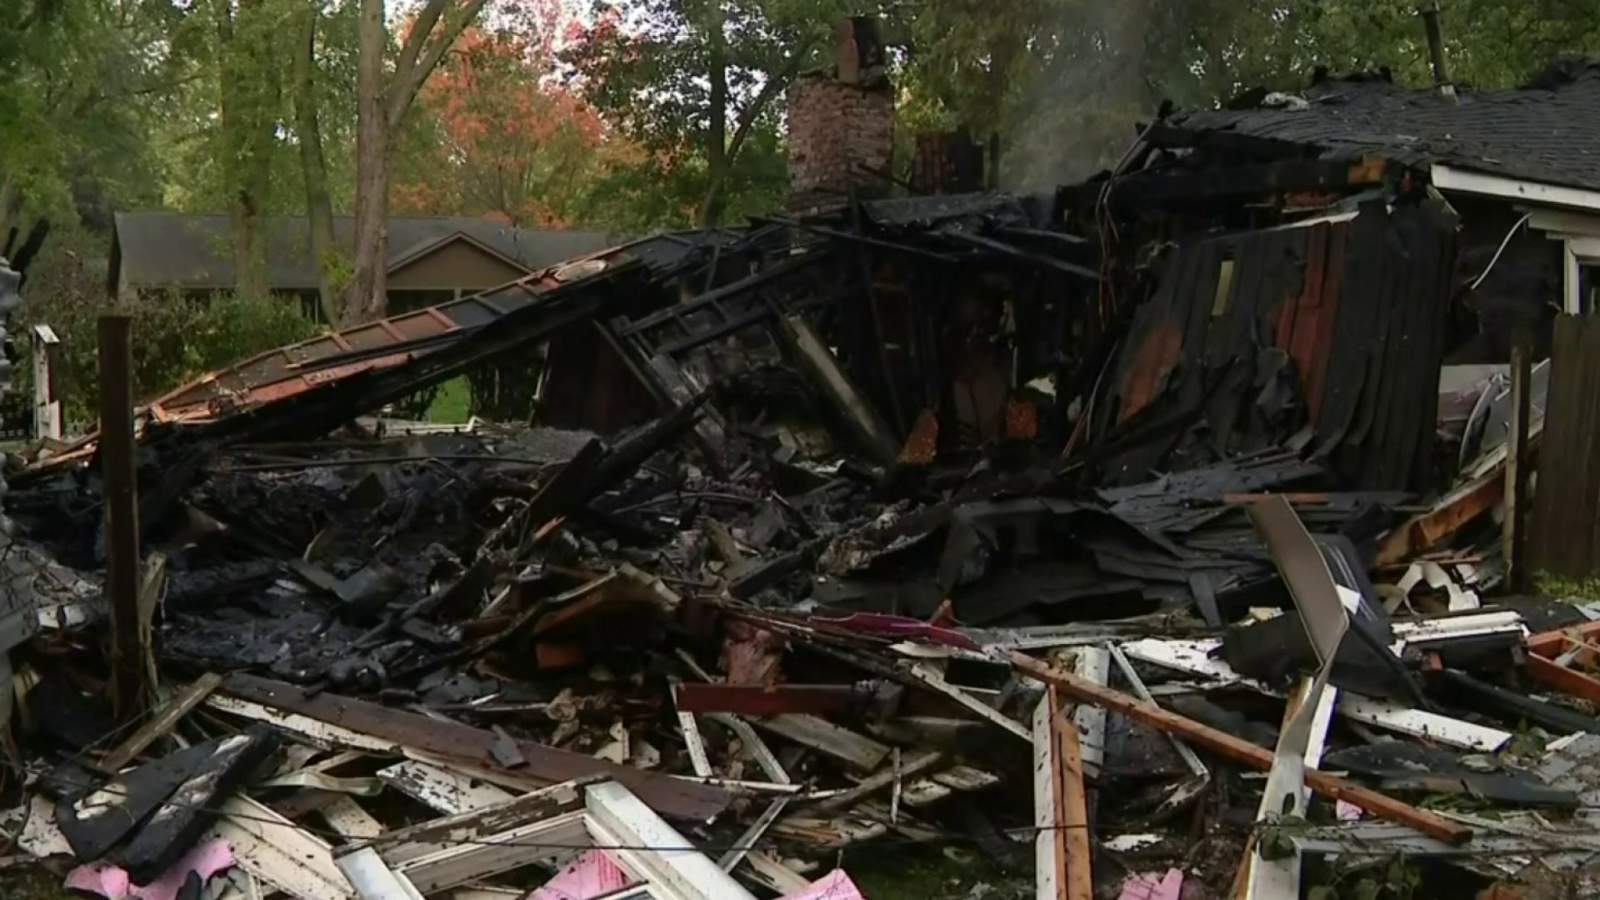 Officials: Drug operation may have caused Commerce Township home explosion